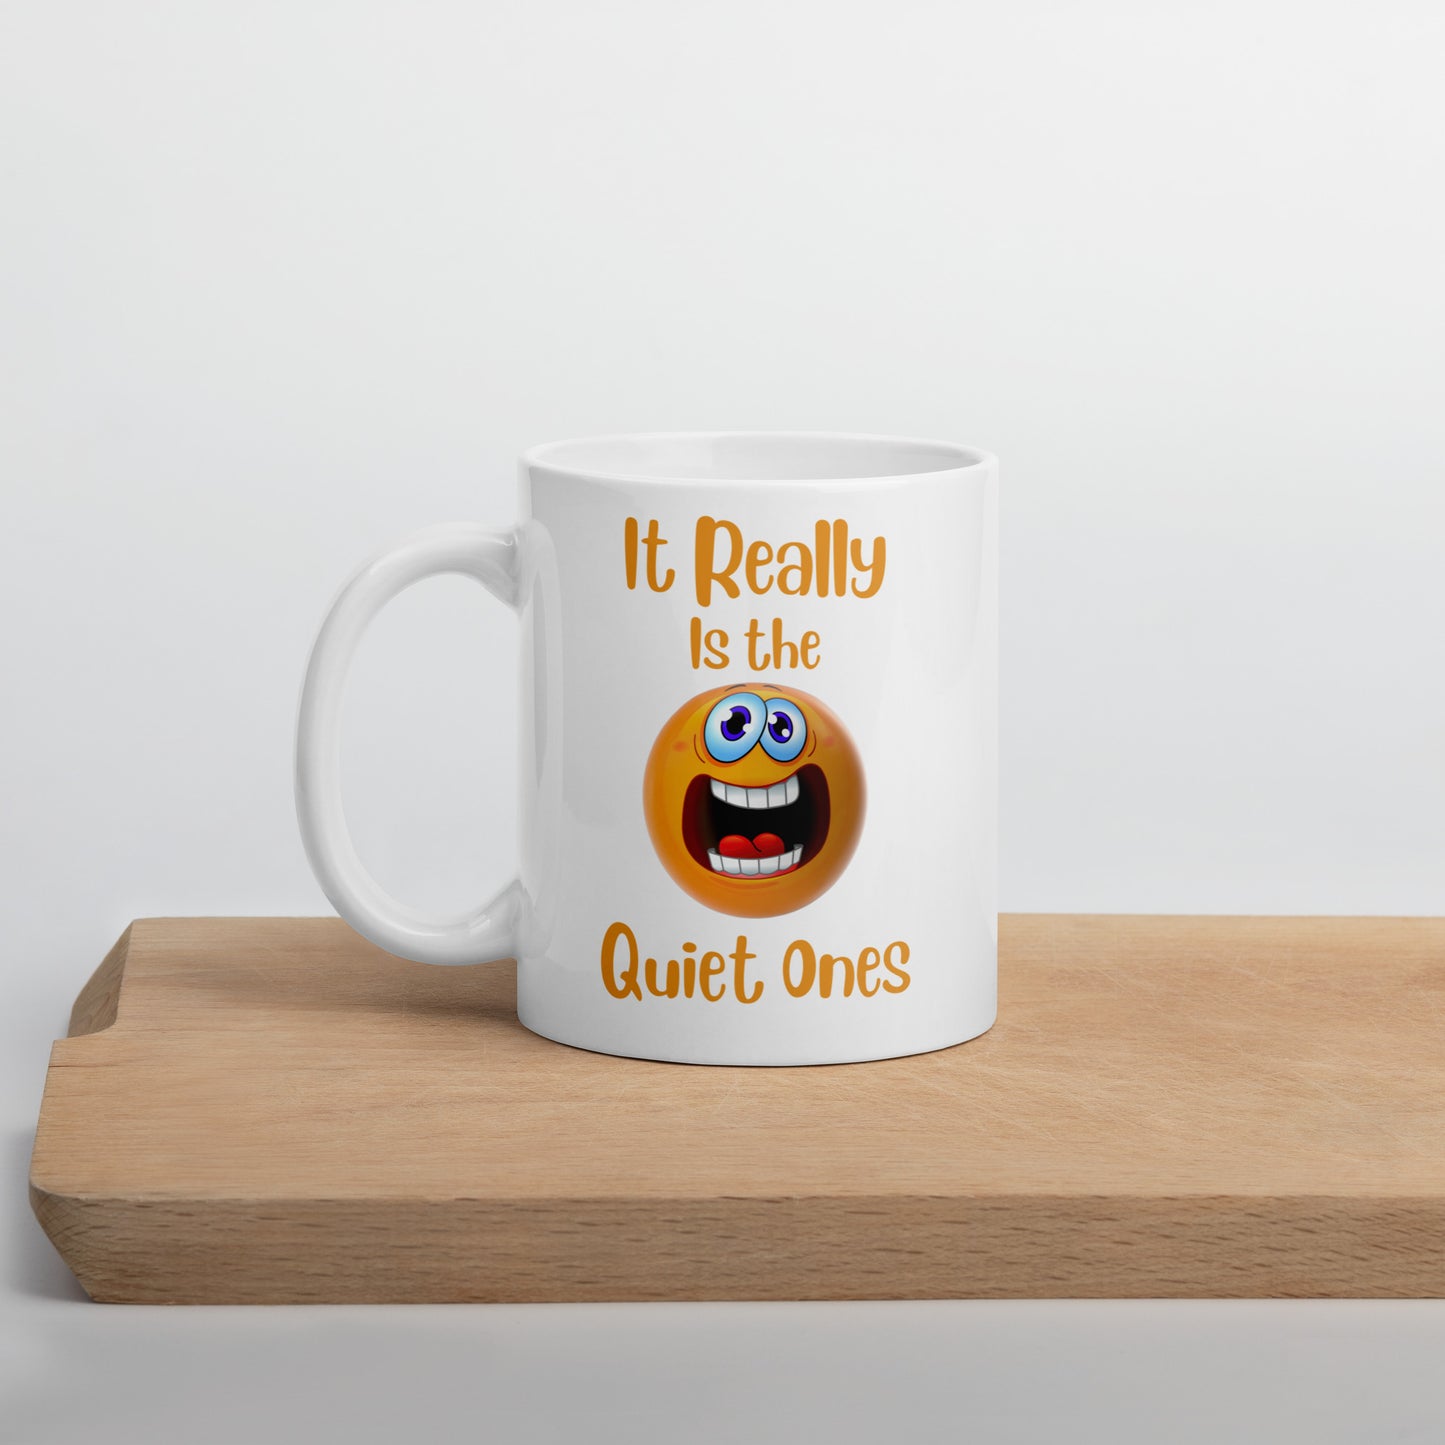 It Really is the Quiet Ones Funny Ceramic Coffee Mug